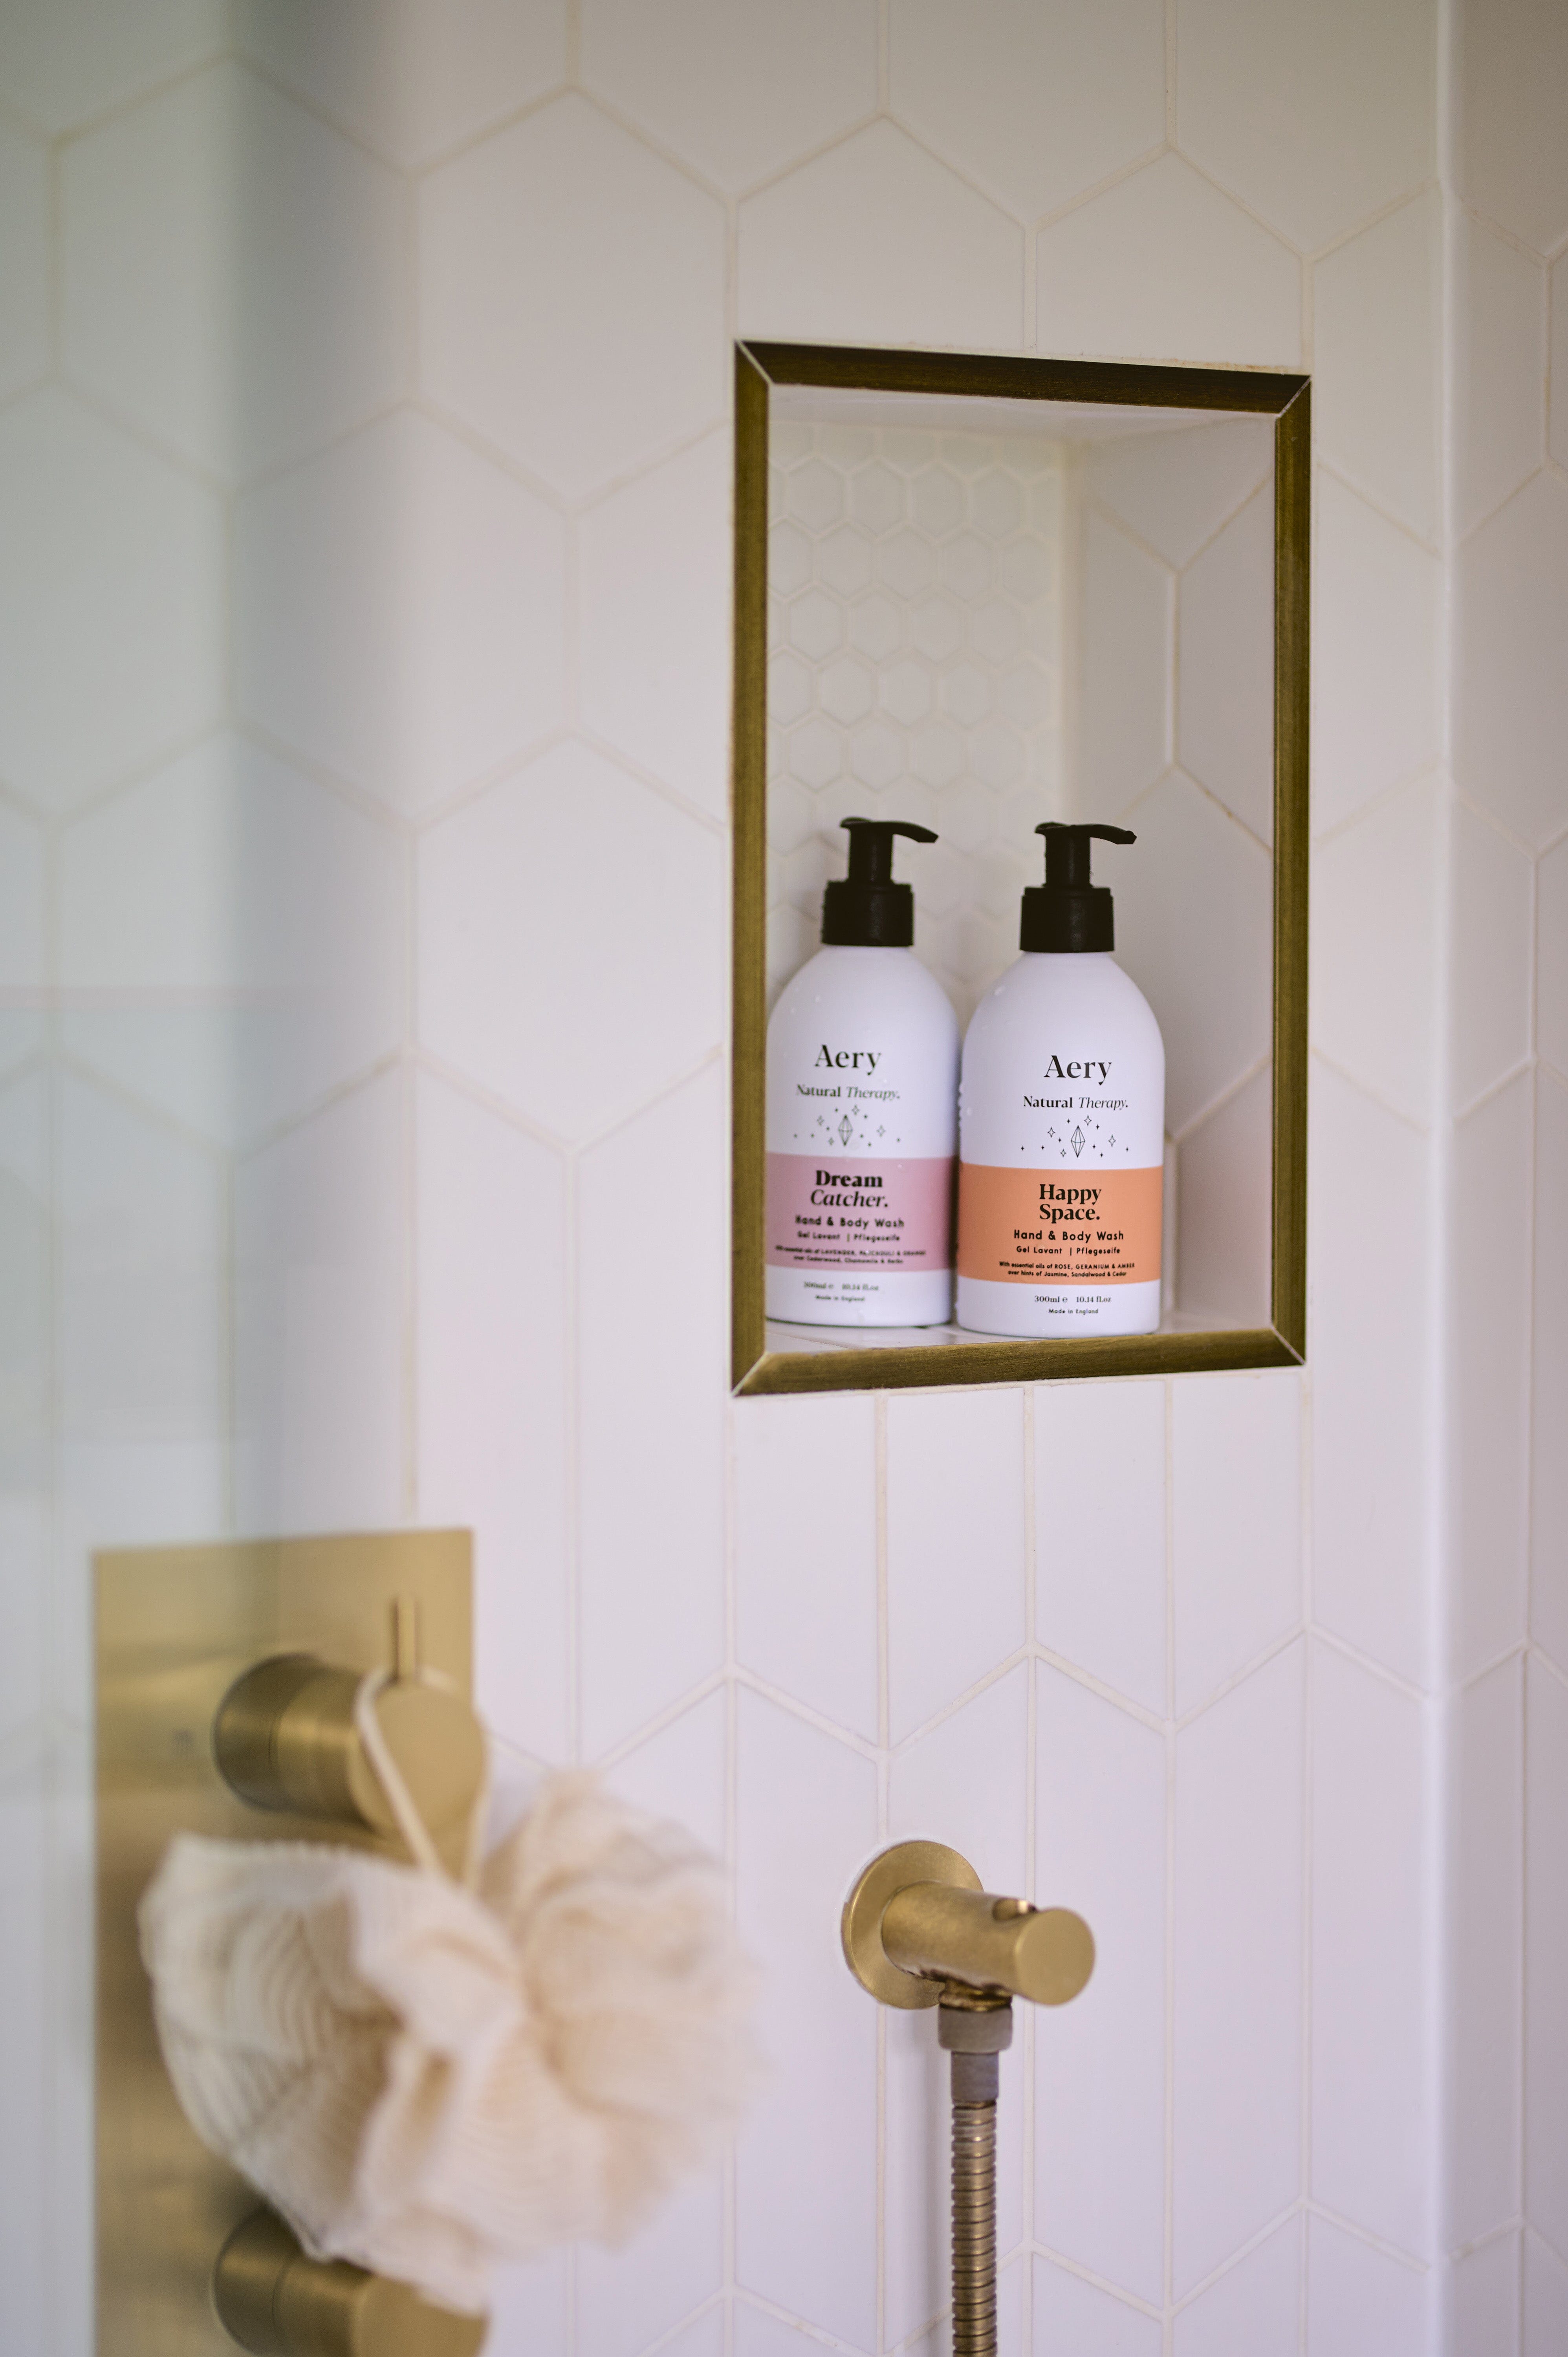 Lilac Dream Catcher hand wash by Aery displayed next to Pink Happy Space hand wash placed on shelf in shower 